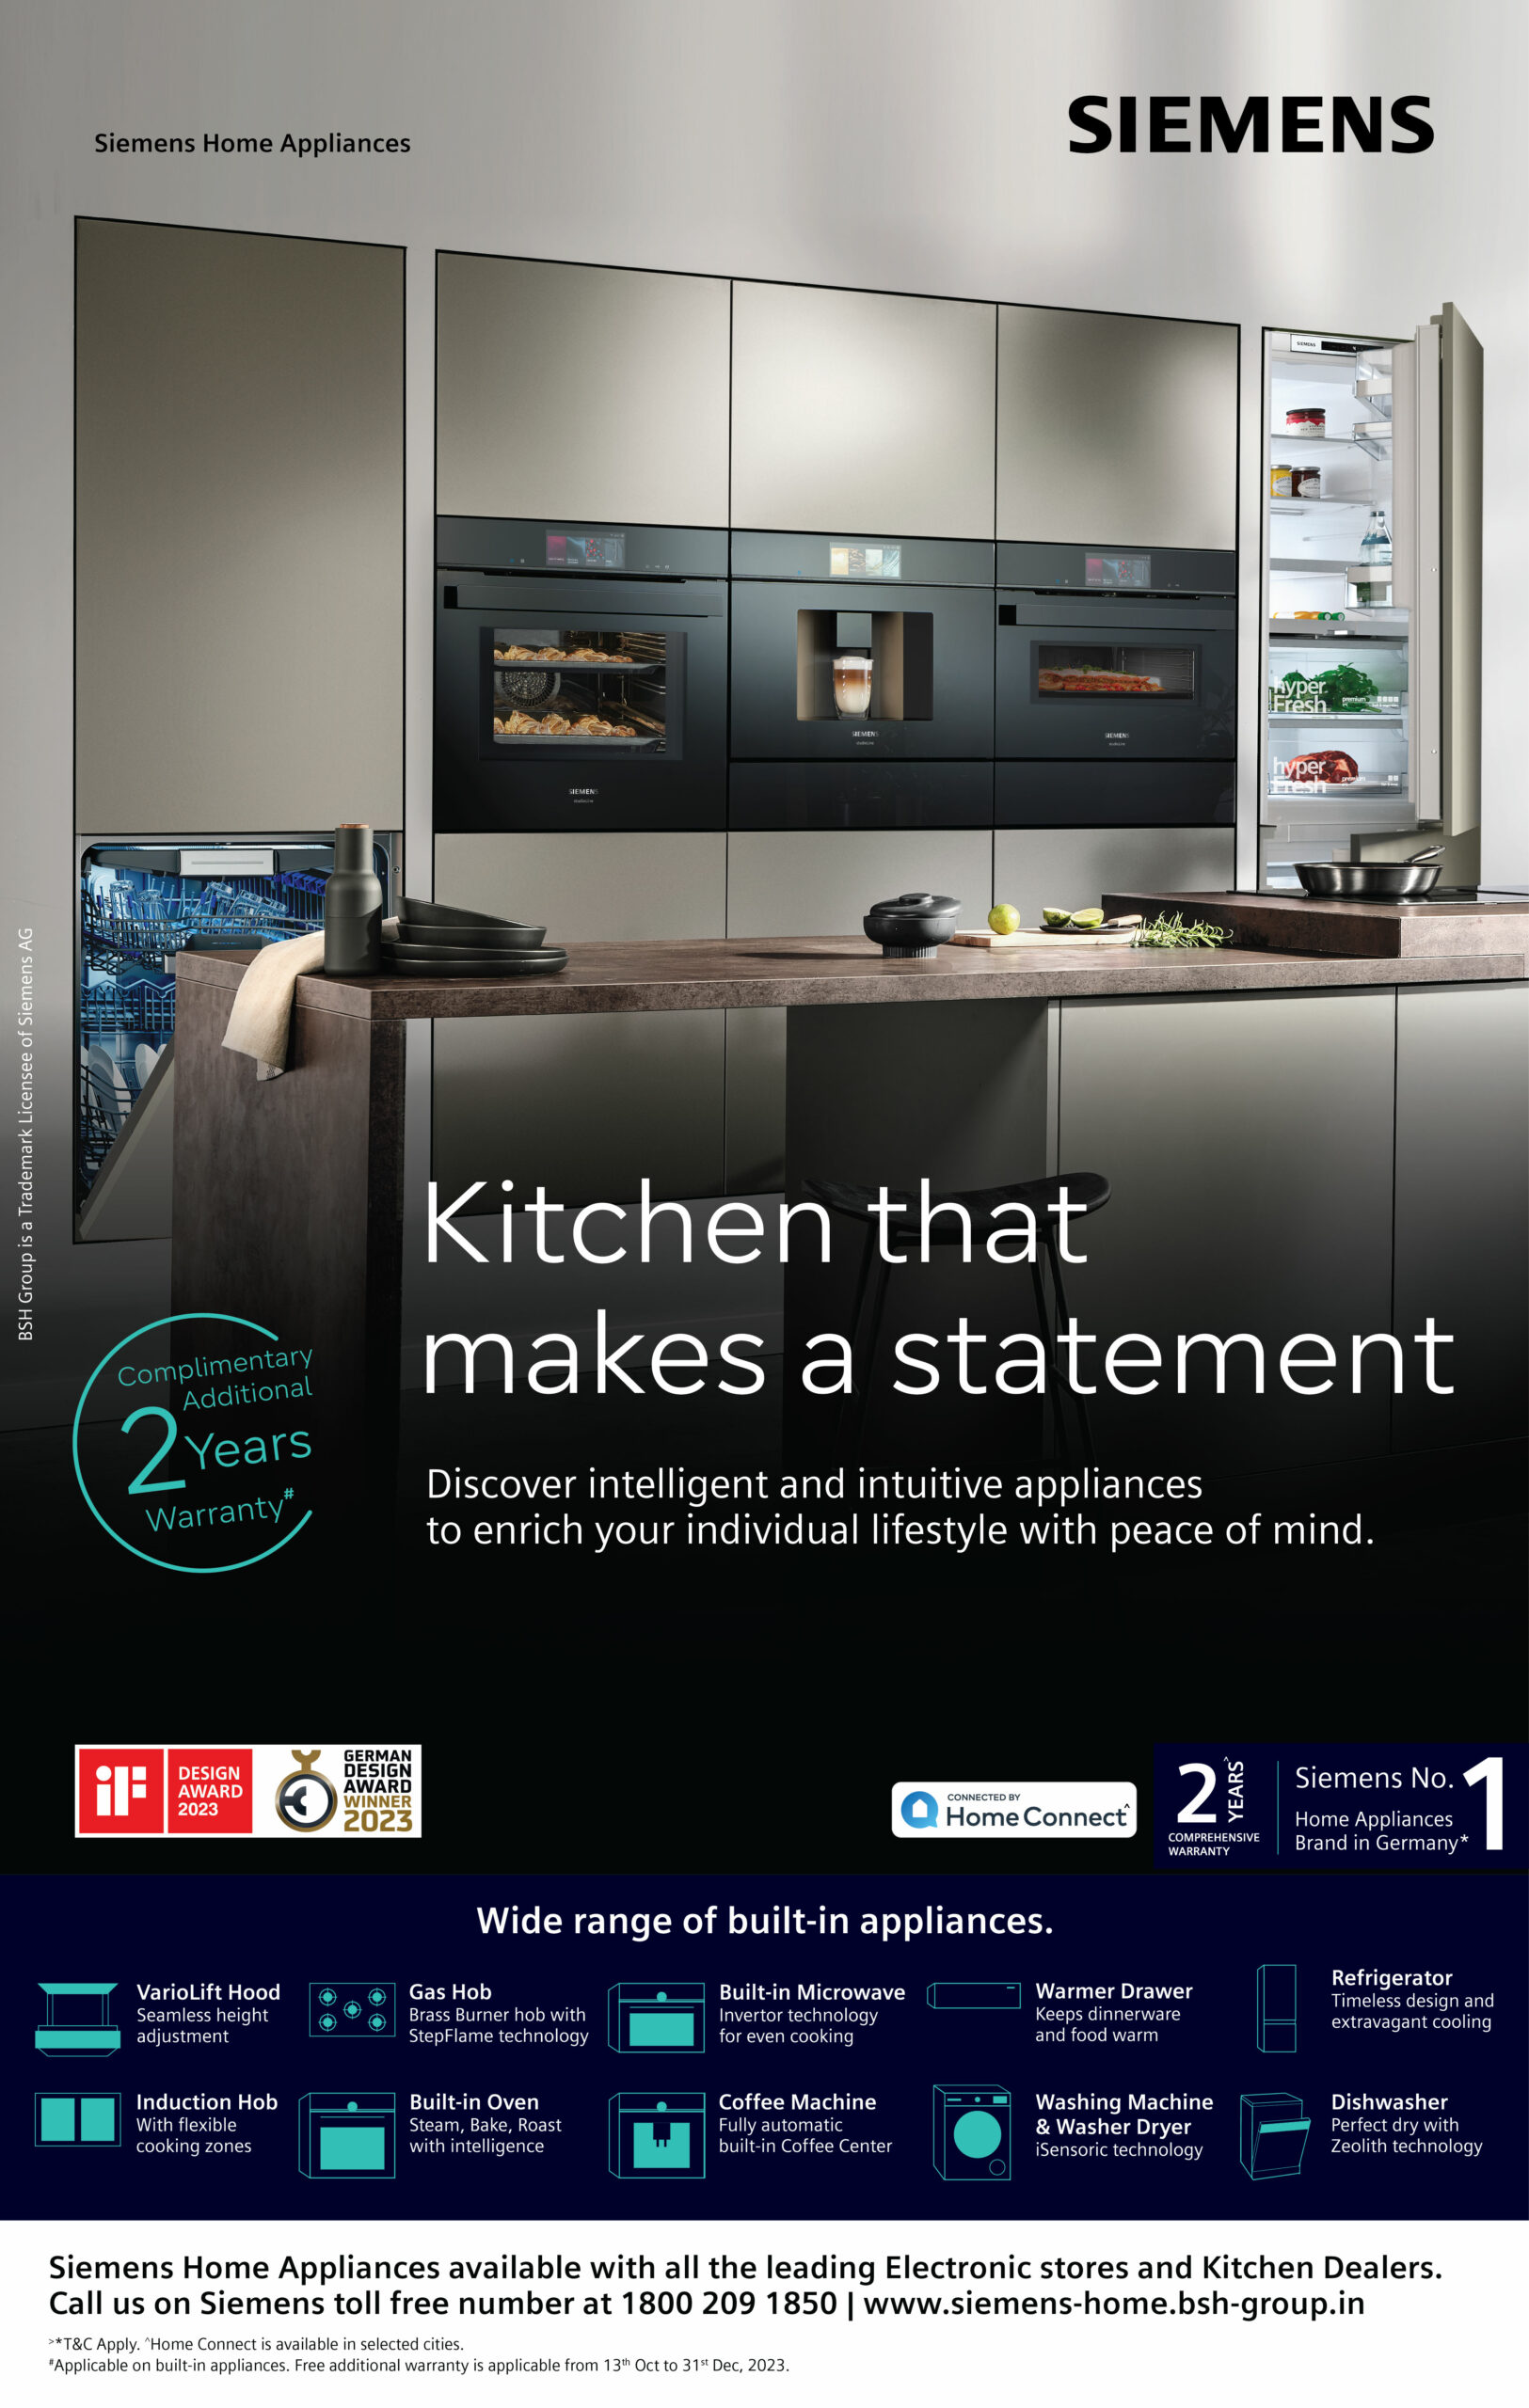 BSH home appliances India presents an exclusive 2-year extended warranty program for Siemens built-in appliances